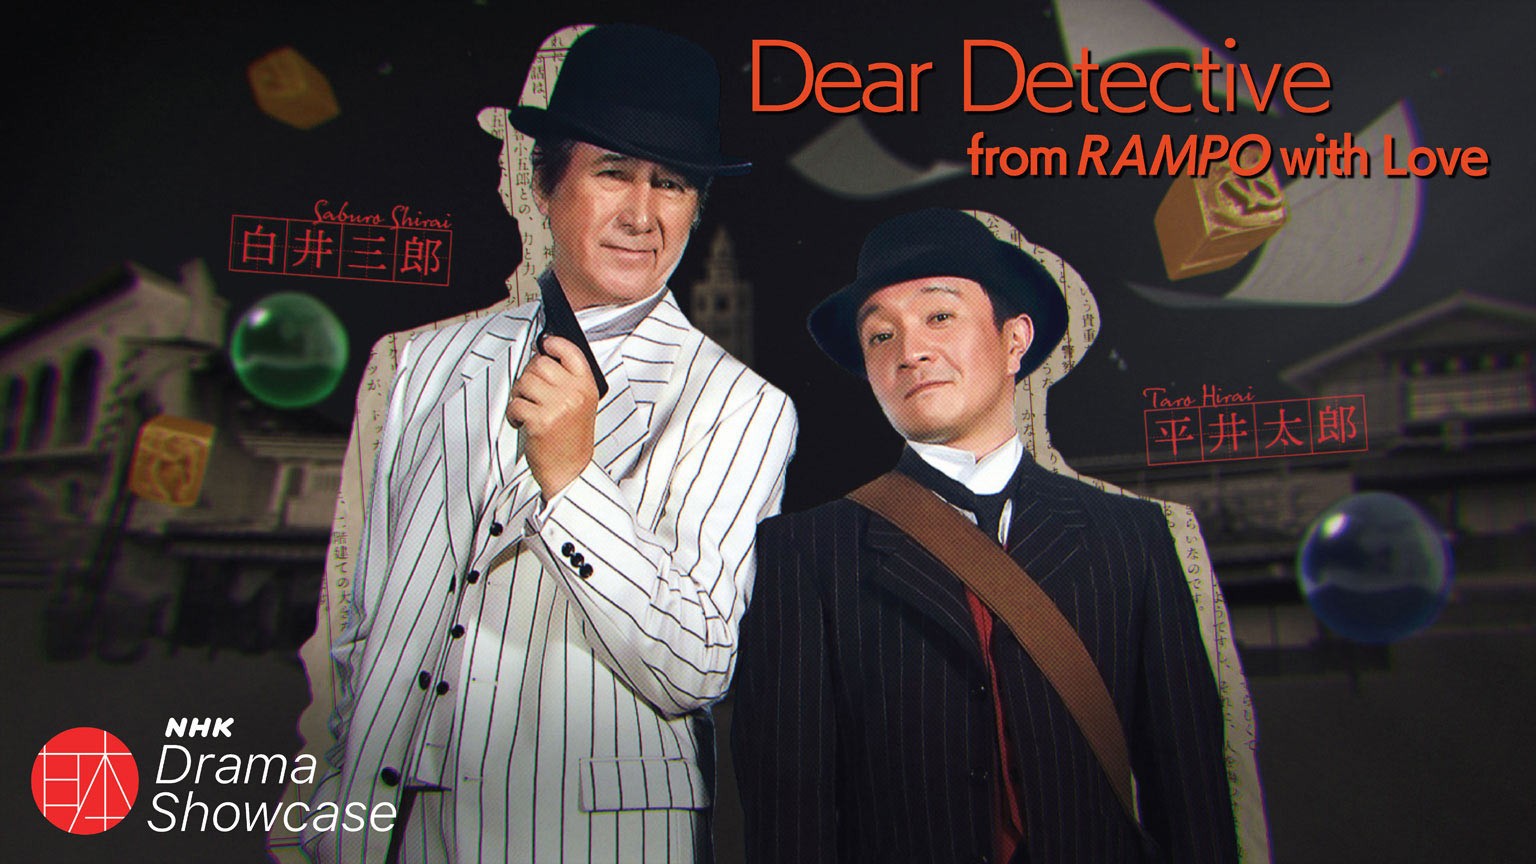 Dear Detective from RAMPO with Love